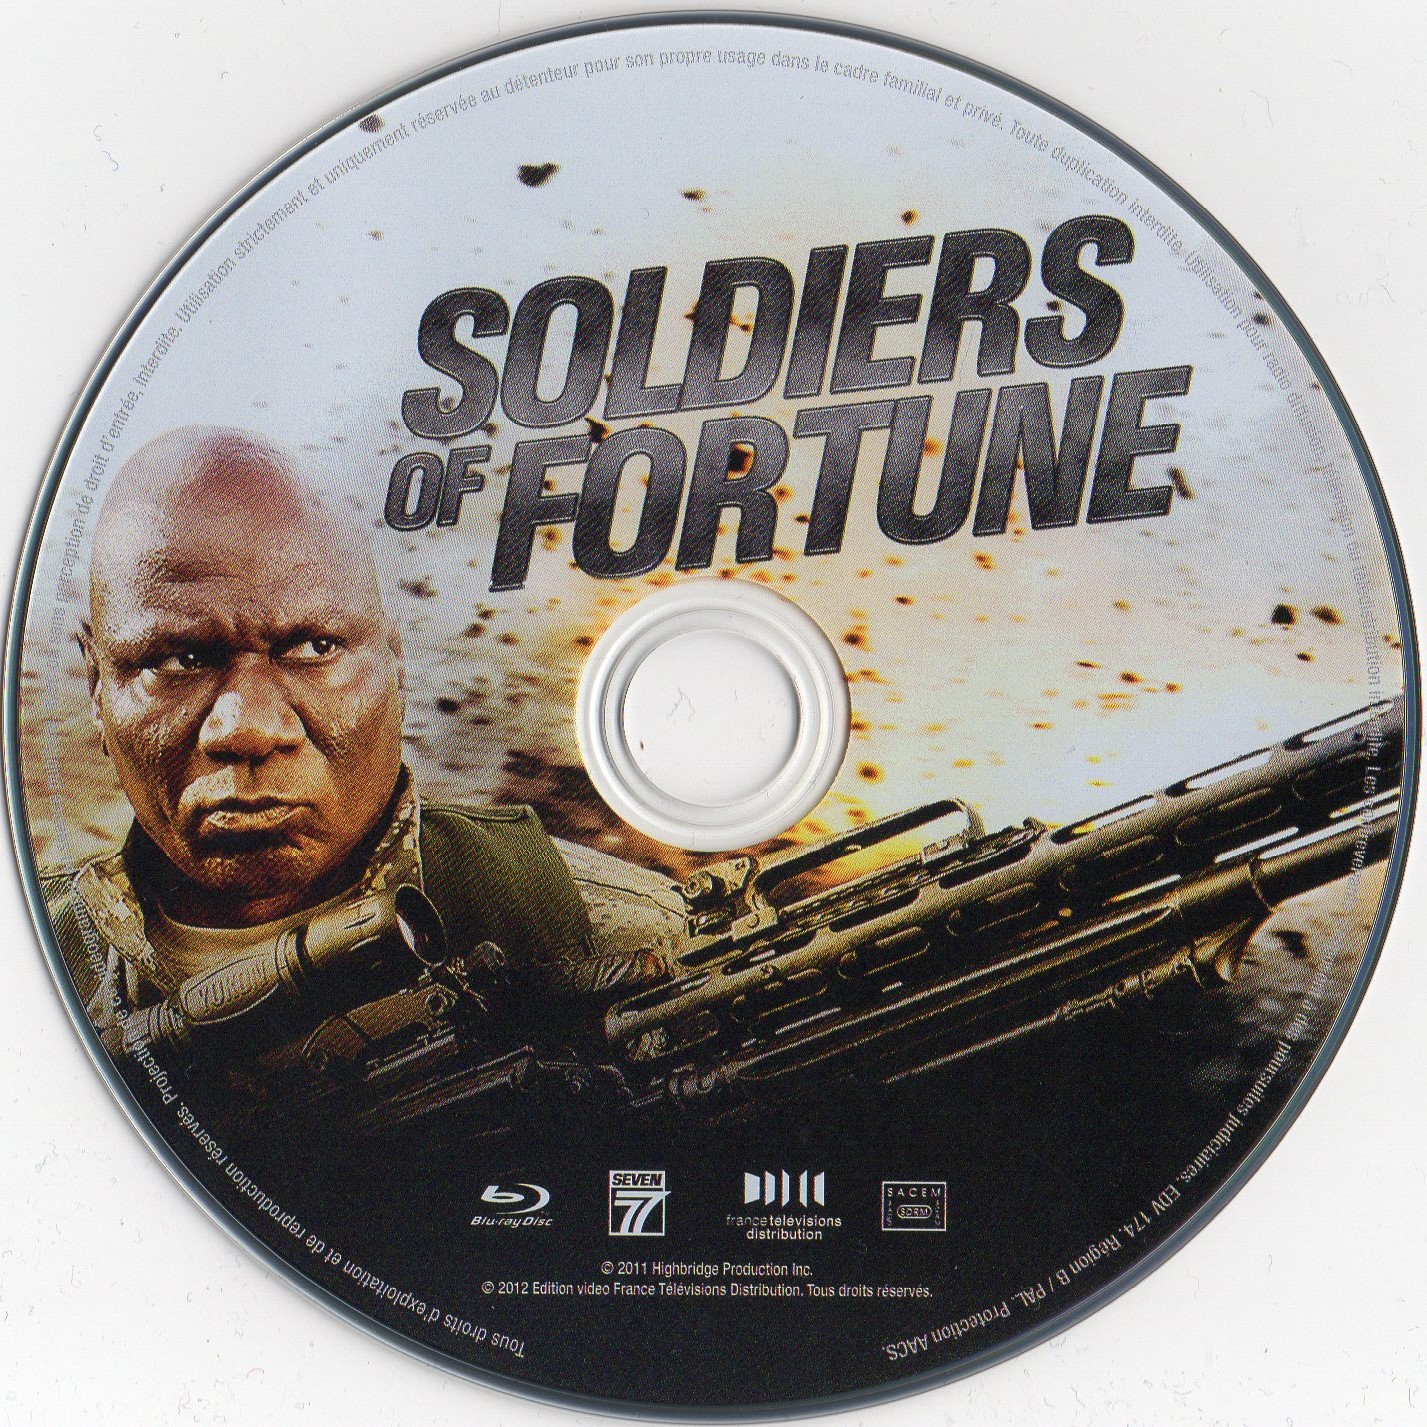 Soldiers of fortune (BLU-RAY)